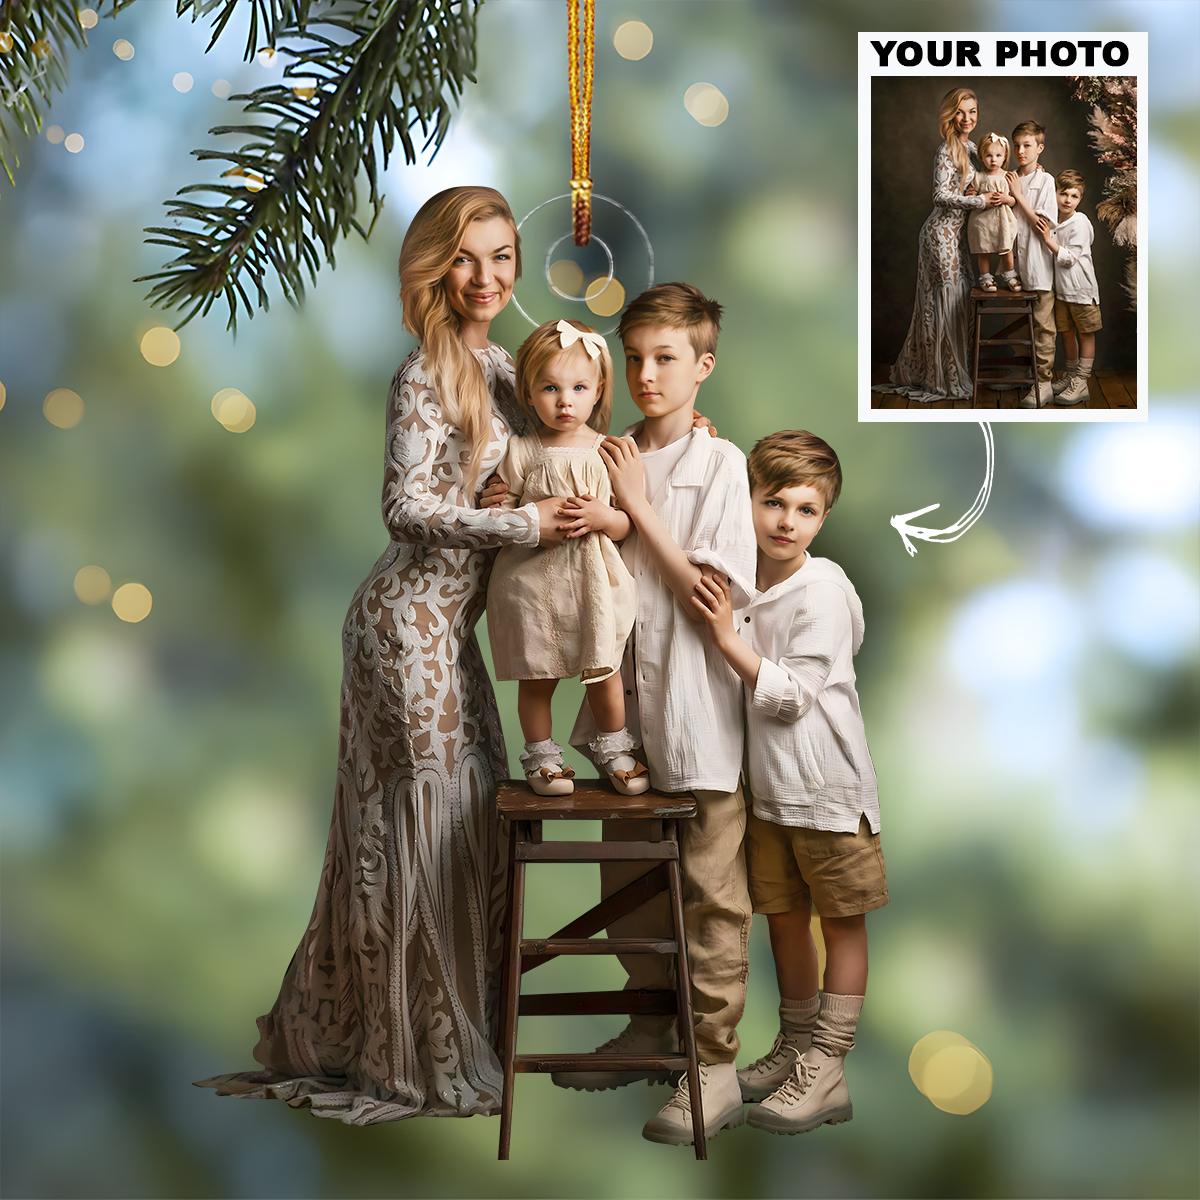 Customized Photo Ornament Family Special Moments V11 - Personalized Photo Mica Ornament - Christmas Gift For Family Members